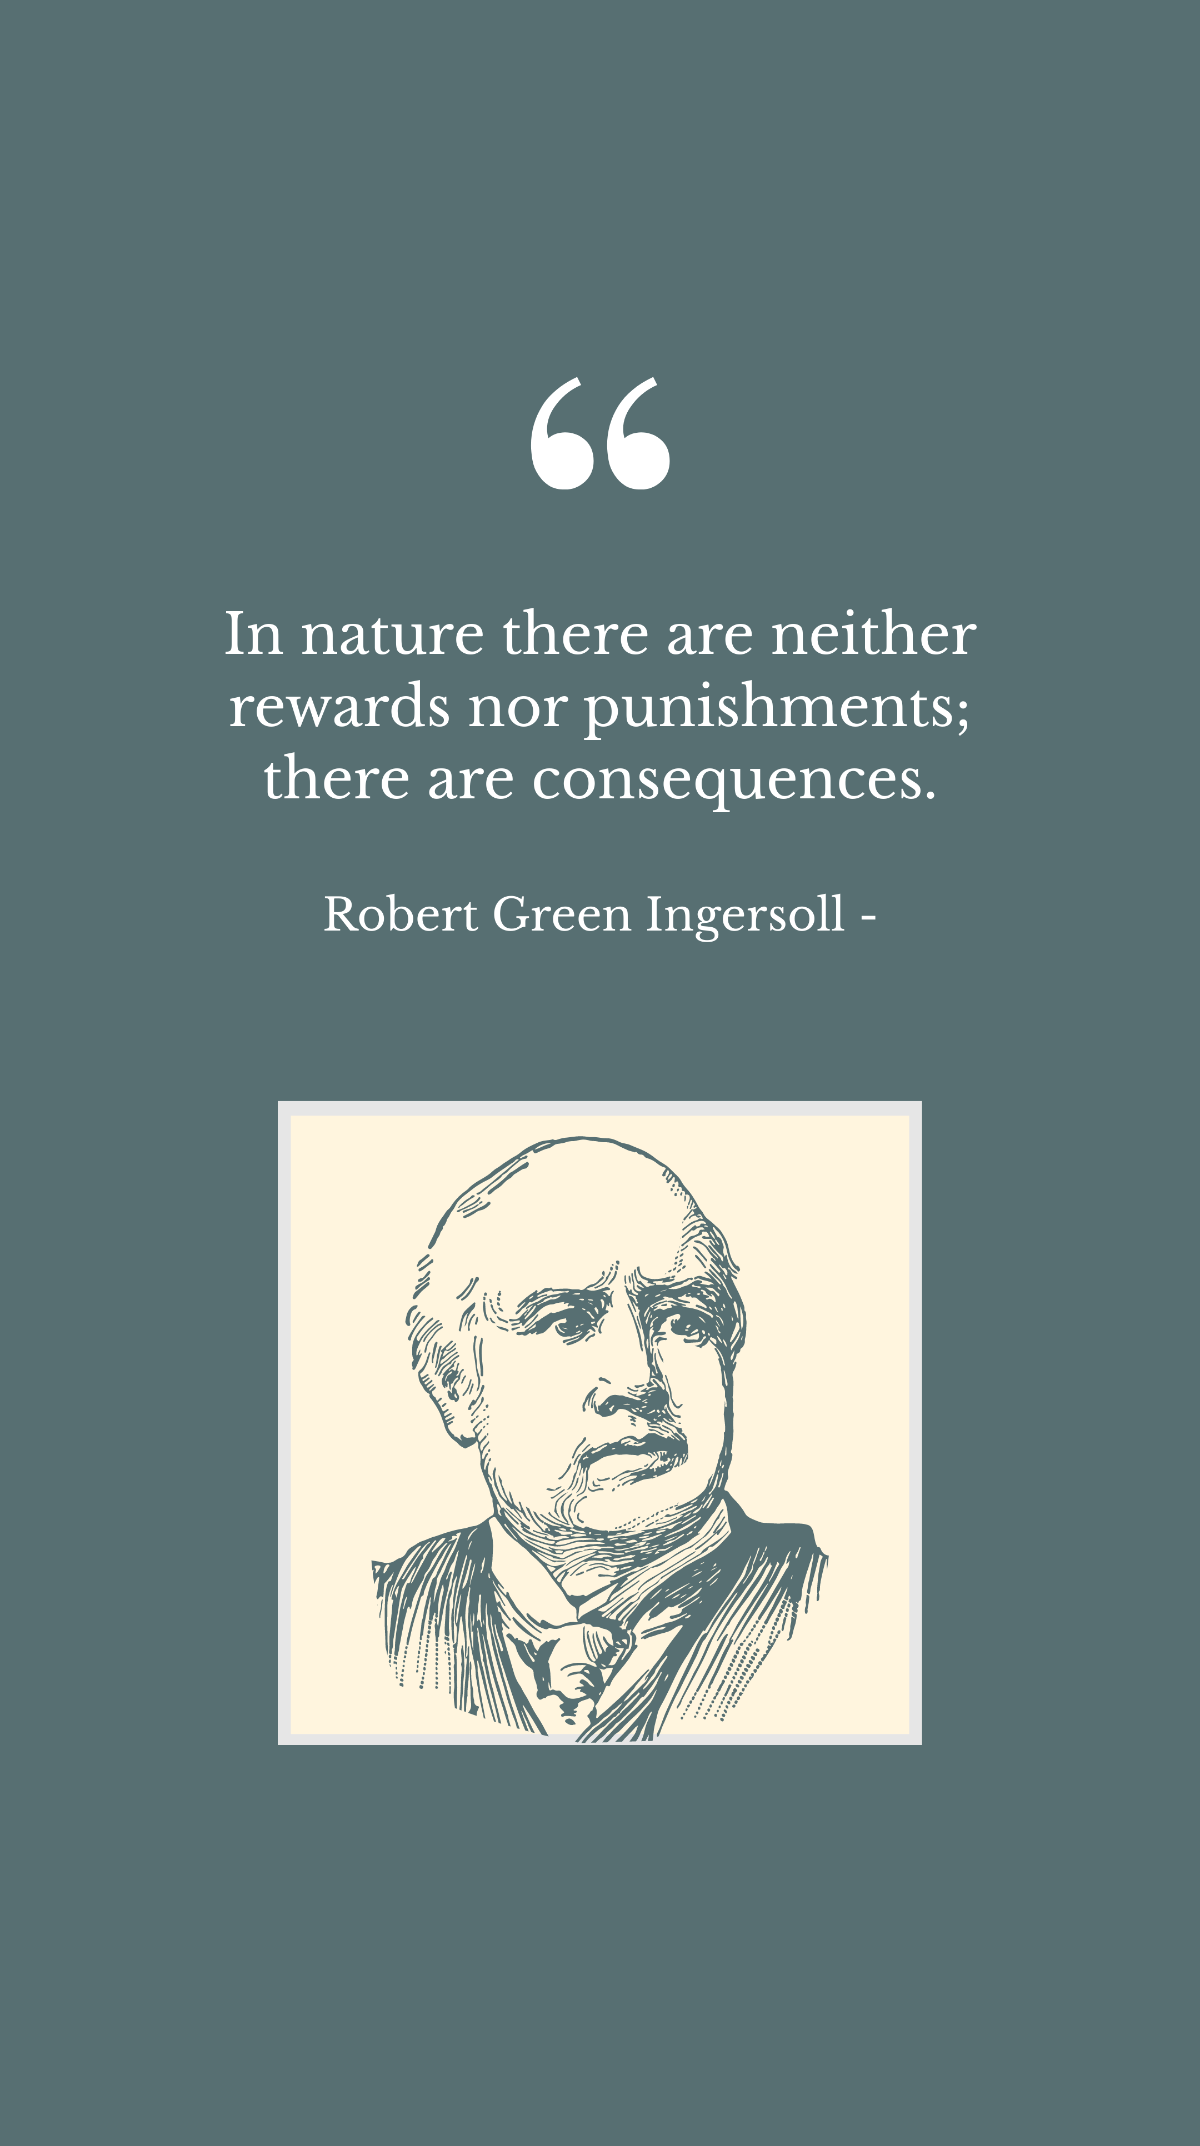 Robert Green Ingersoll - In nature there are neither rewards nor punishments; there are consequences. Template